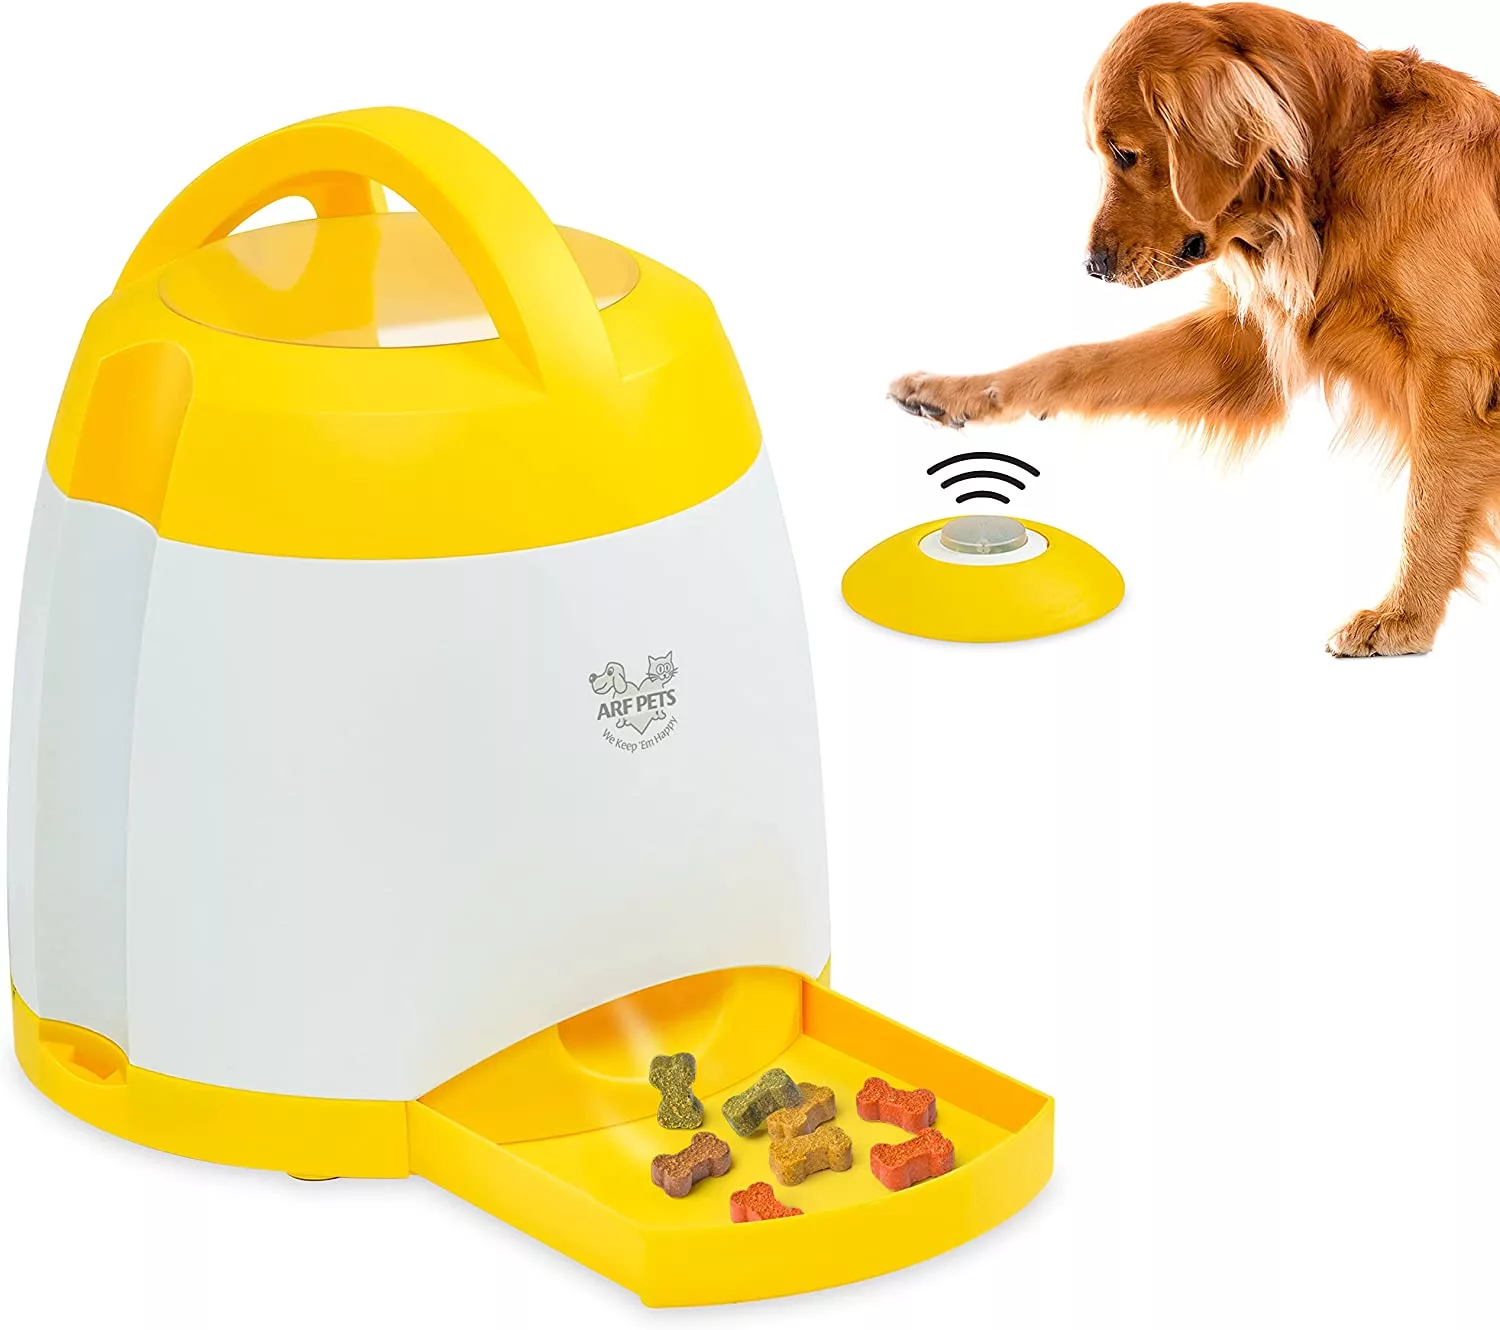 Dog using the Arf Pets Remote Activated Treat Dispenser